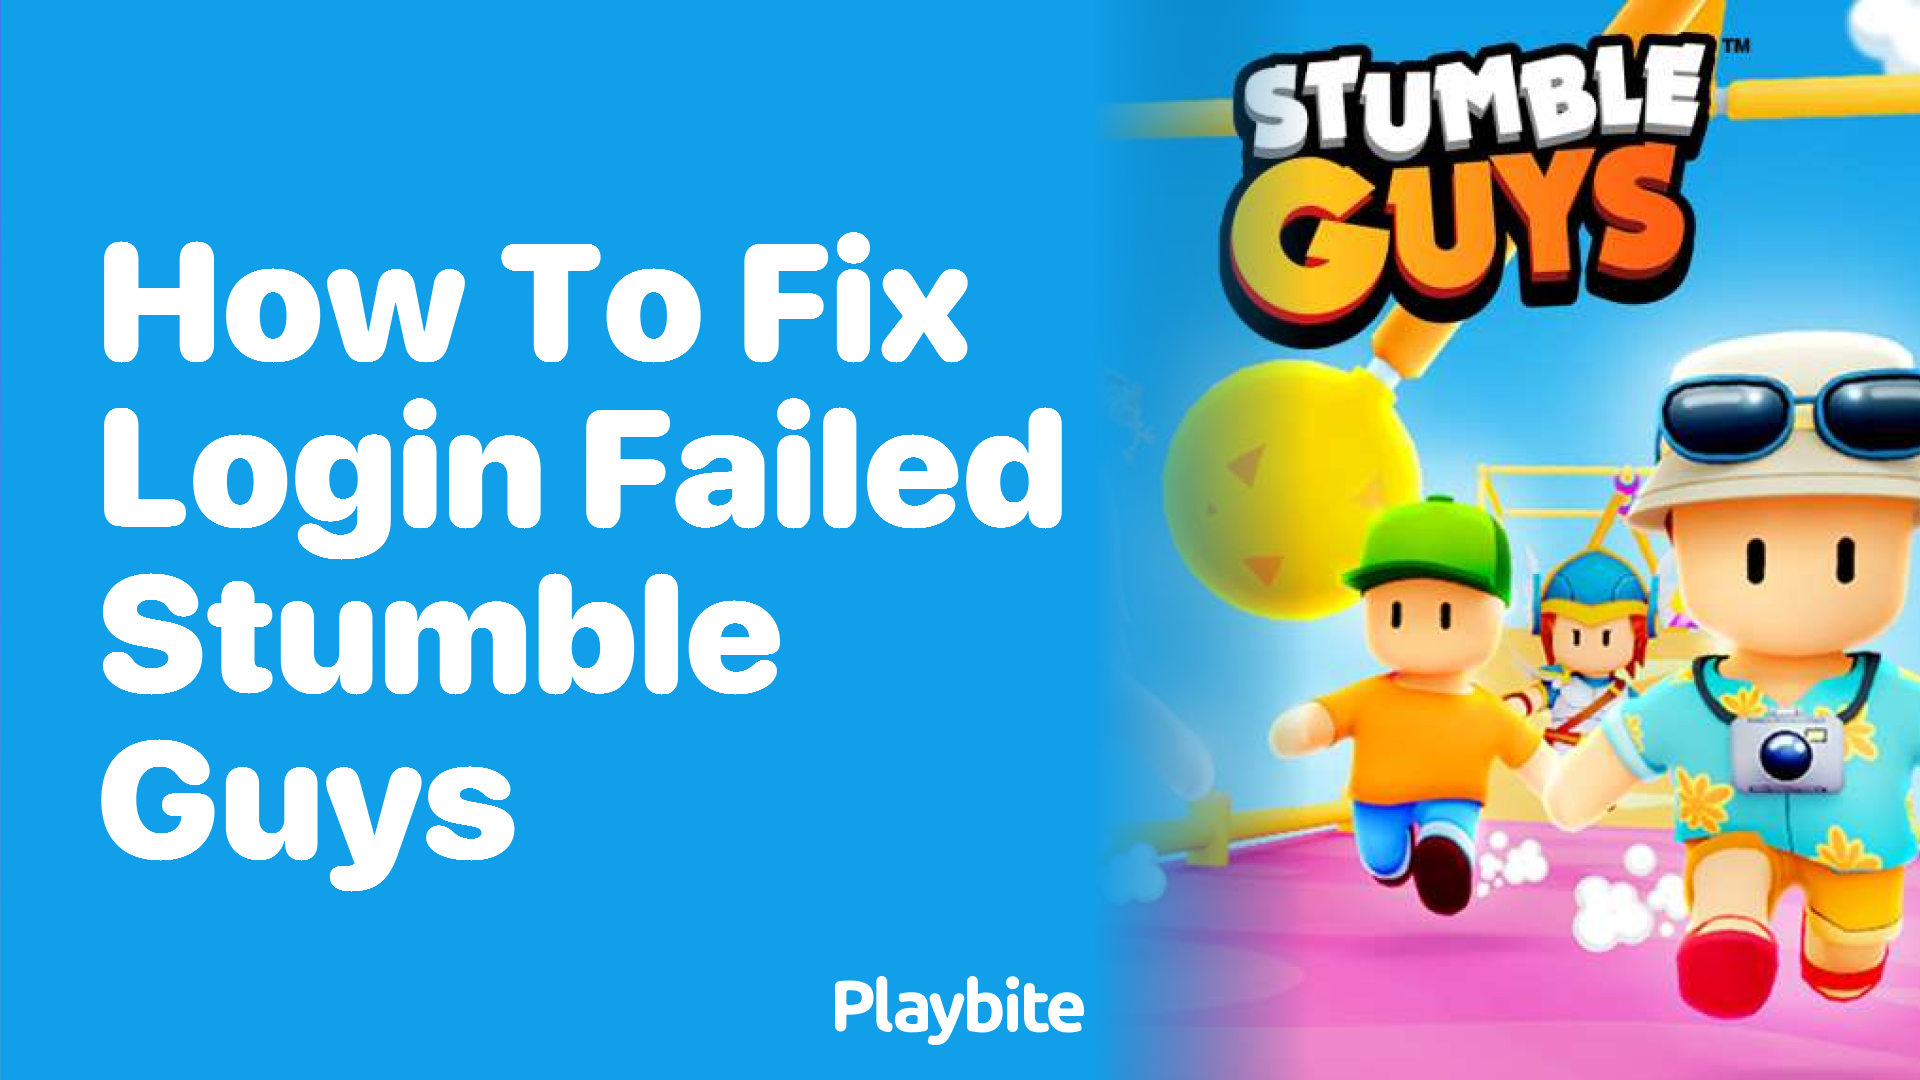 How to Fix &#8216;Login Failed&#8217; in Stumble Guys? Simple Steps to Get You Back in the Game